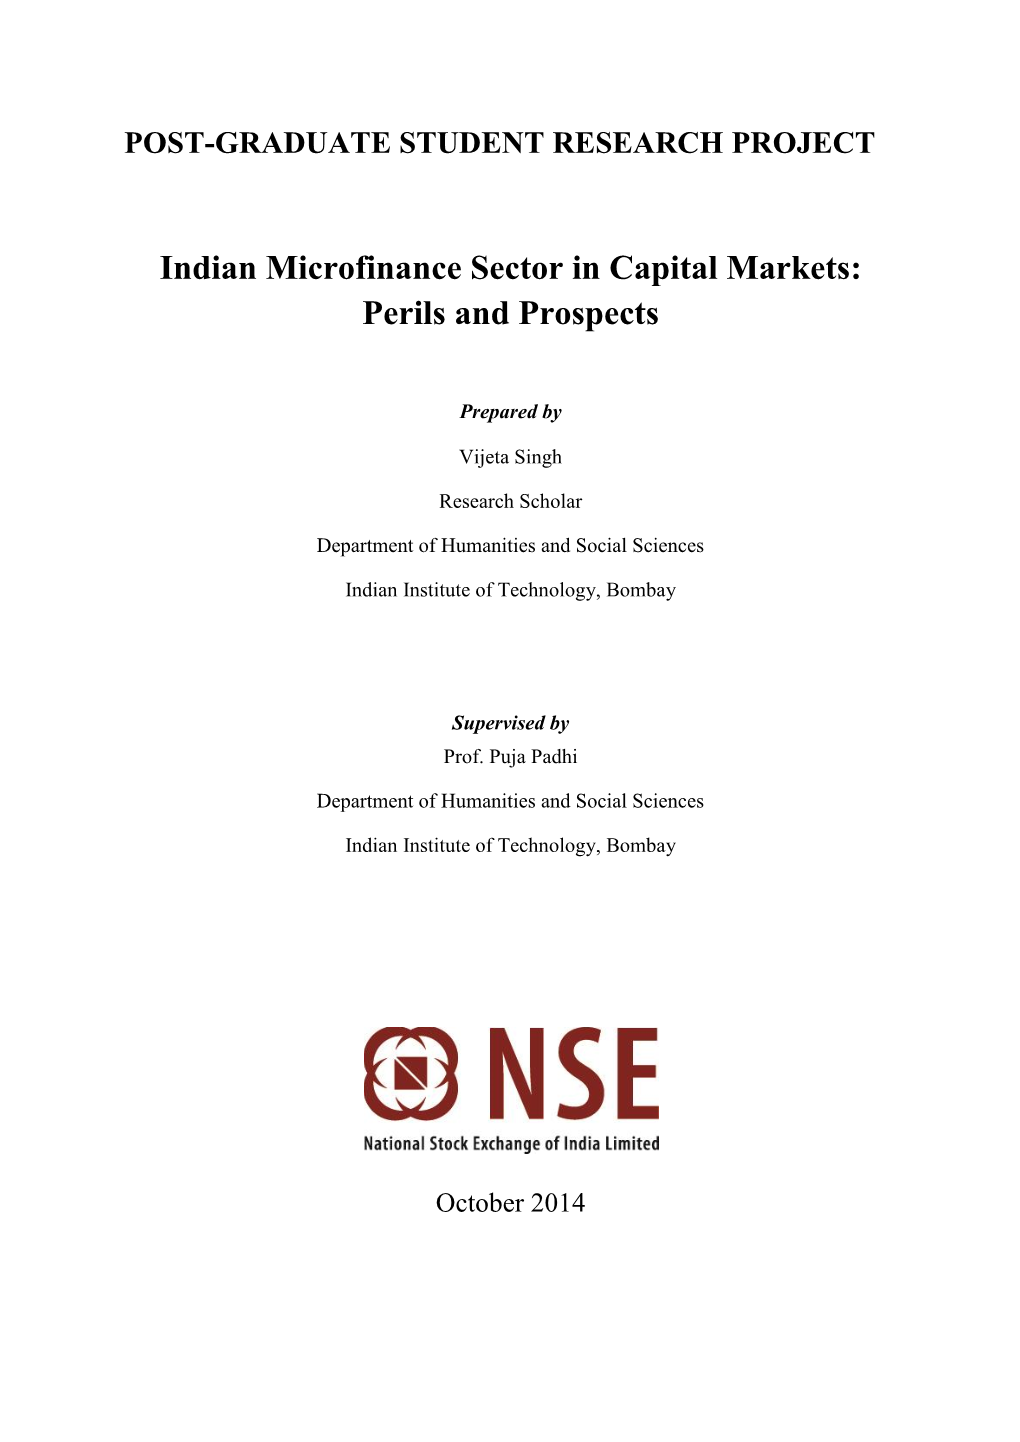 Indian Microfinance Sector in Capital Markets: Perils and Prospects